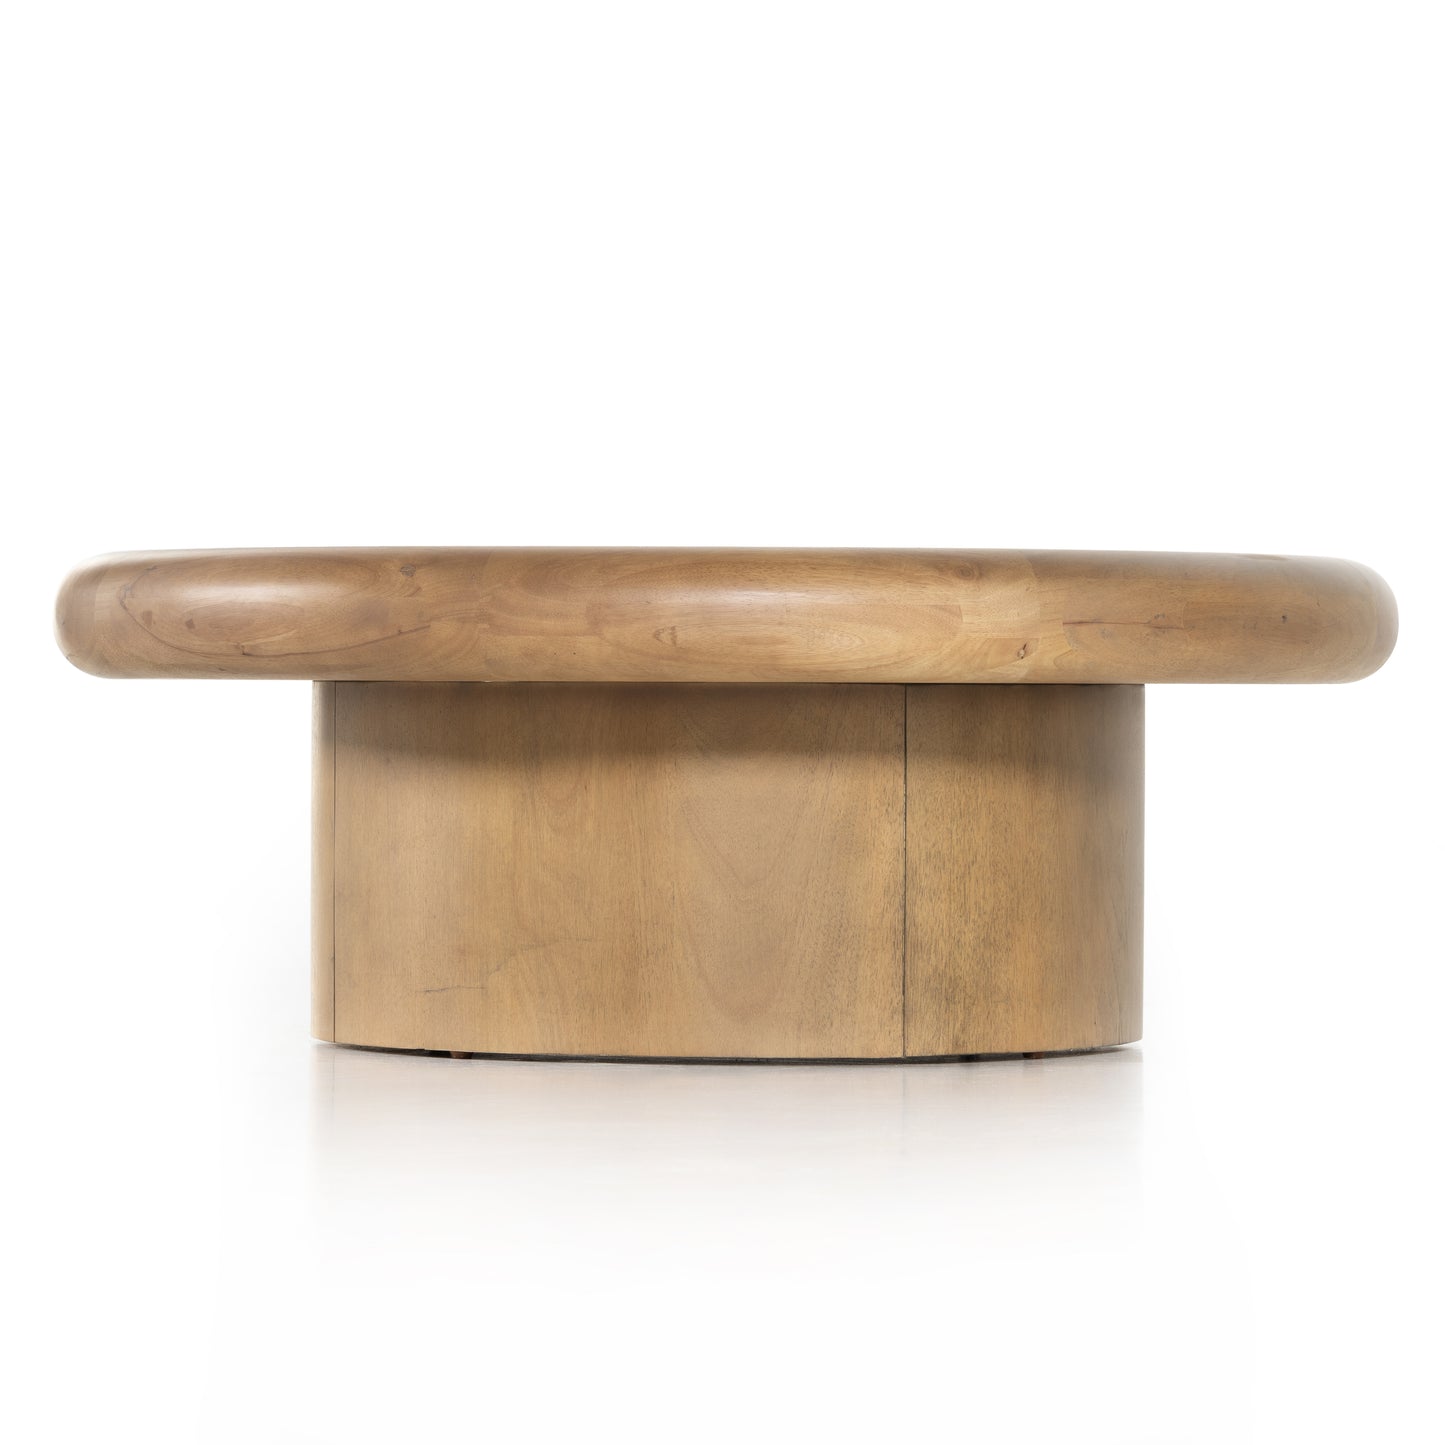 Load image into Gallery viewer, Zach Coffee Table-Burnished Parawood Coffee Tables Four Hands     Four Hands, Burke Decor, Mid Century Modern Furniture, Old Bones Furniture Company, Old Bones Co, Modern Mid Century, Designer Furniture, https://www.oldbonesco.com/
